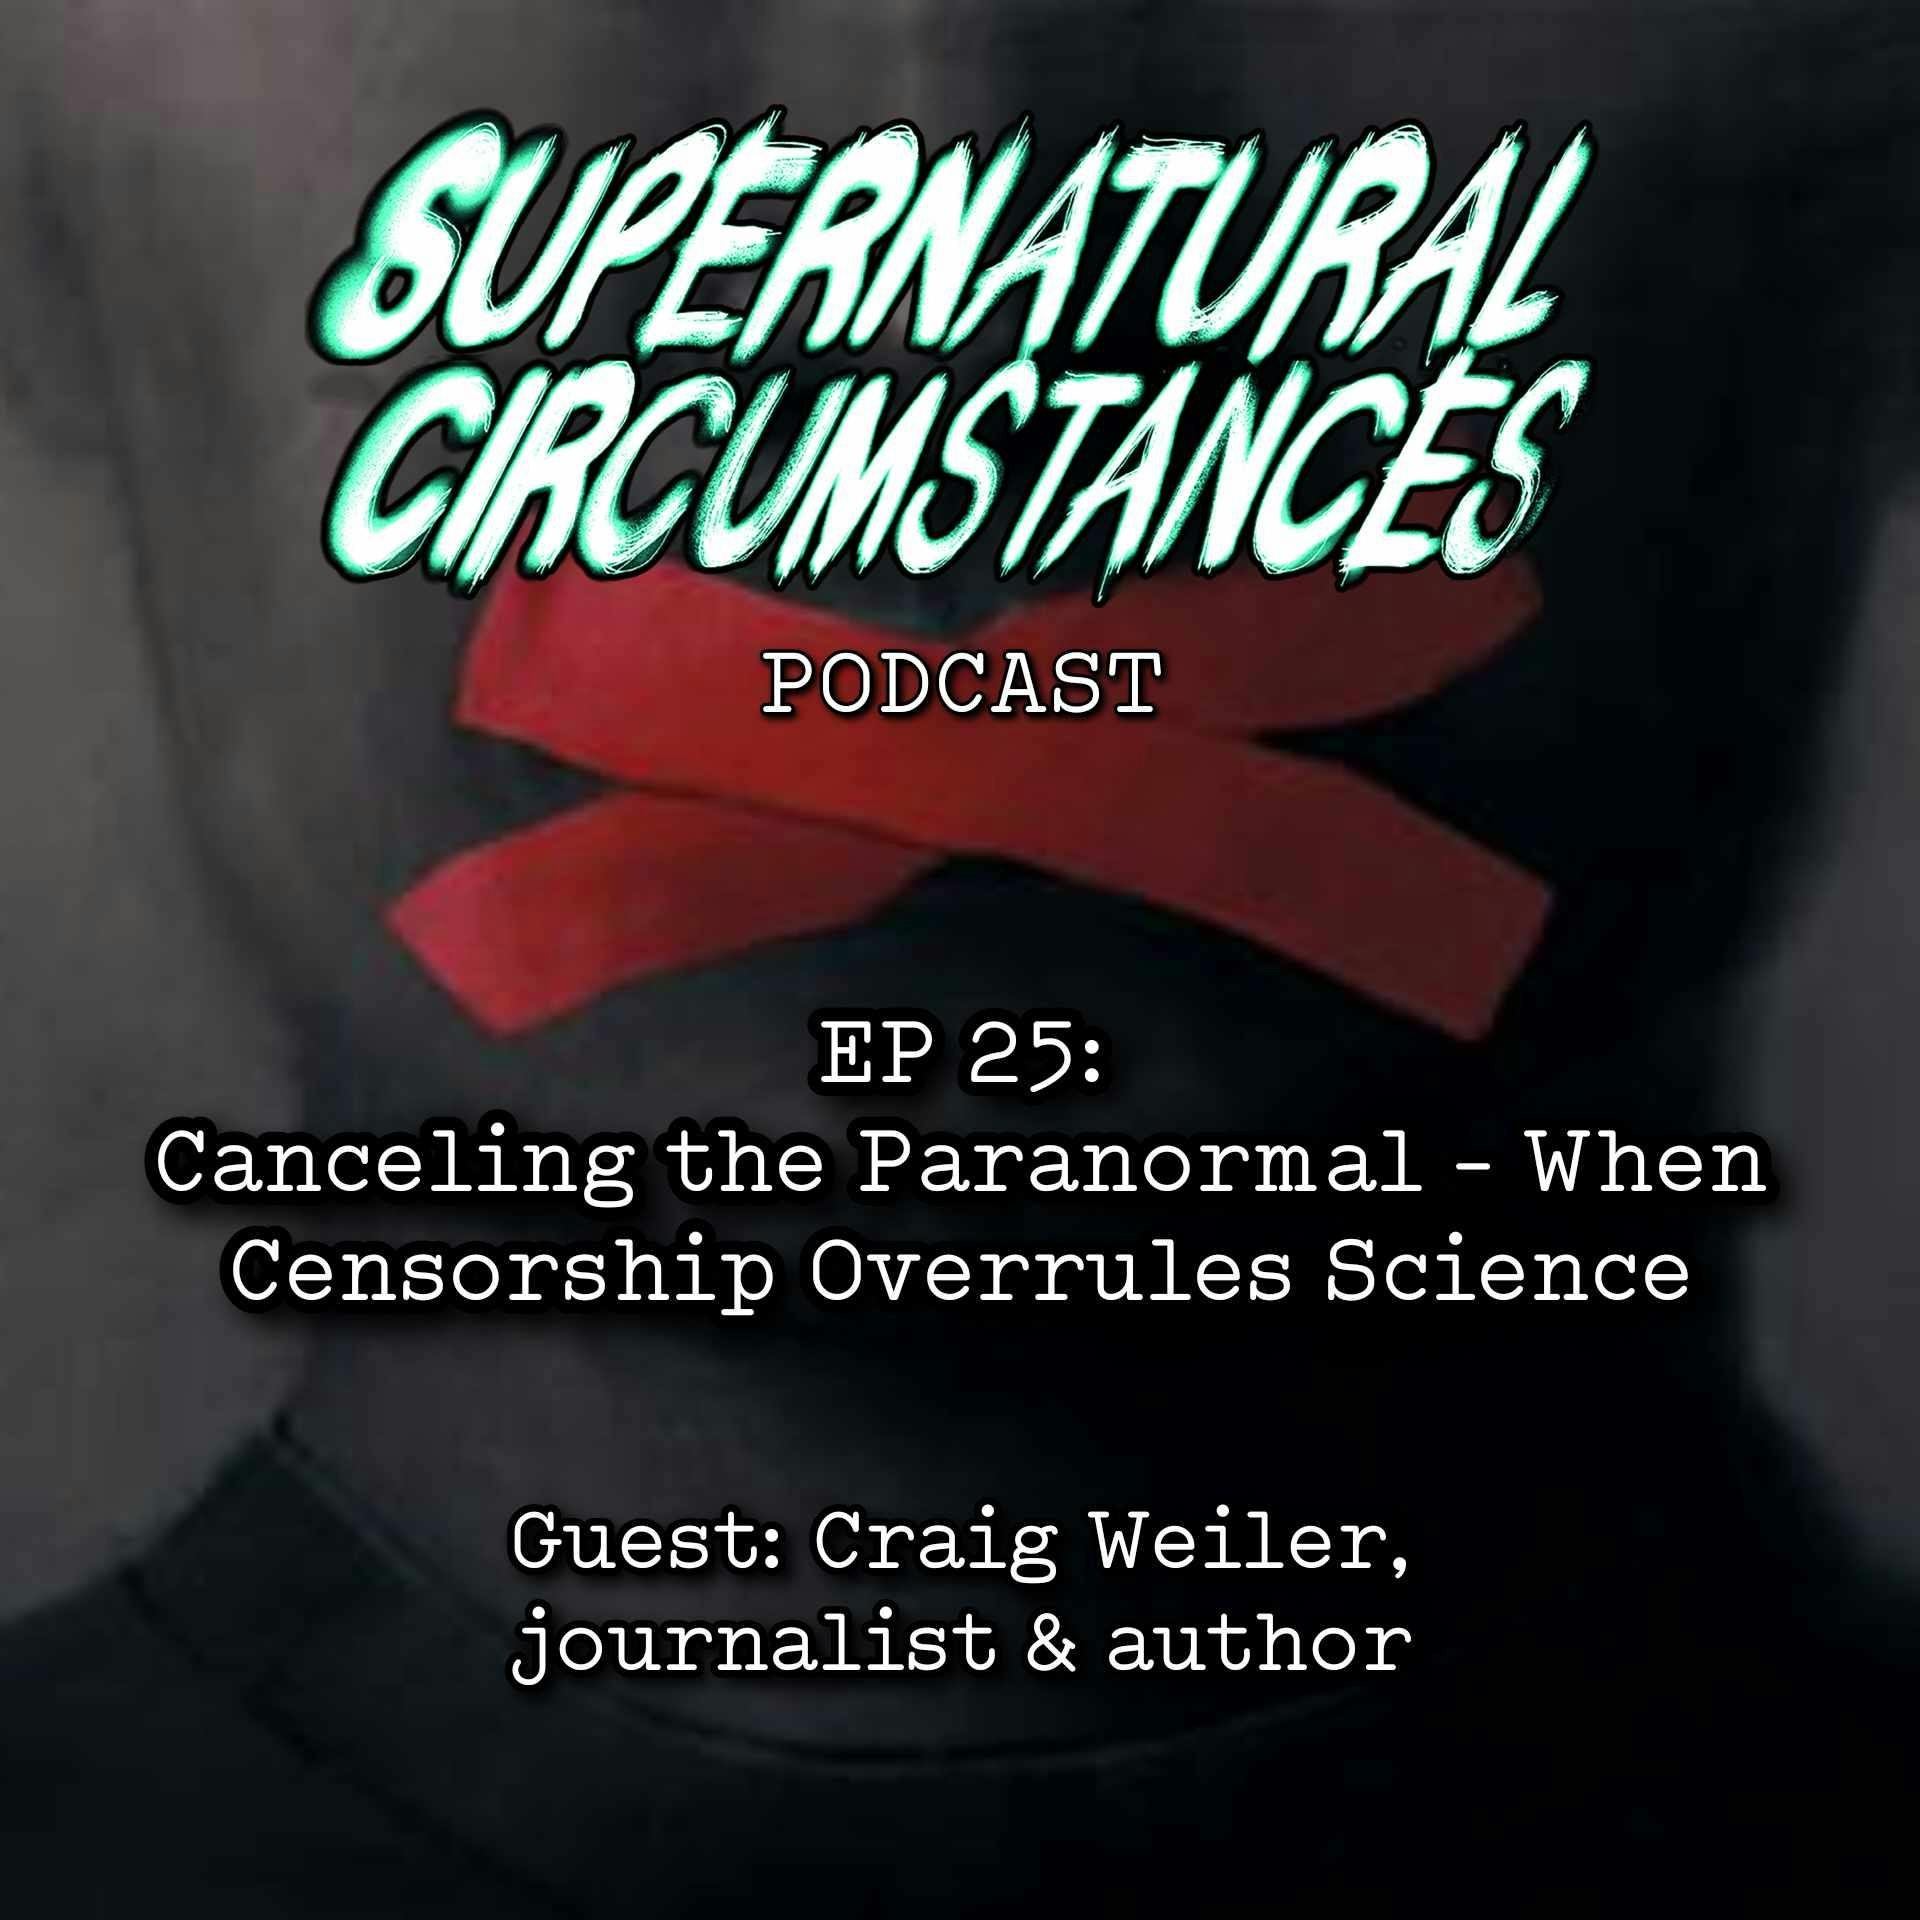 Canceling the Paranormal - When Censorship Overrules Science